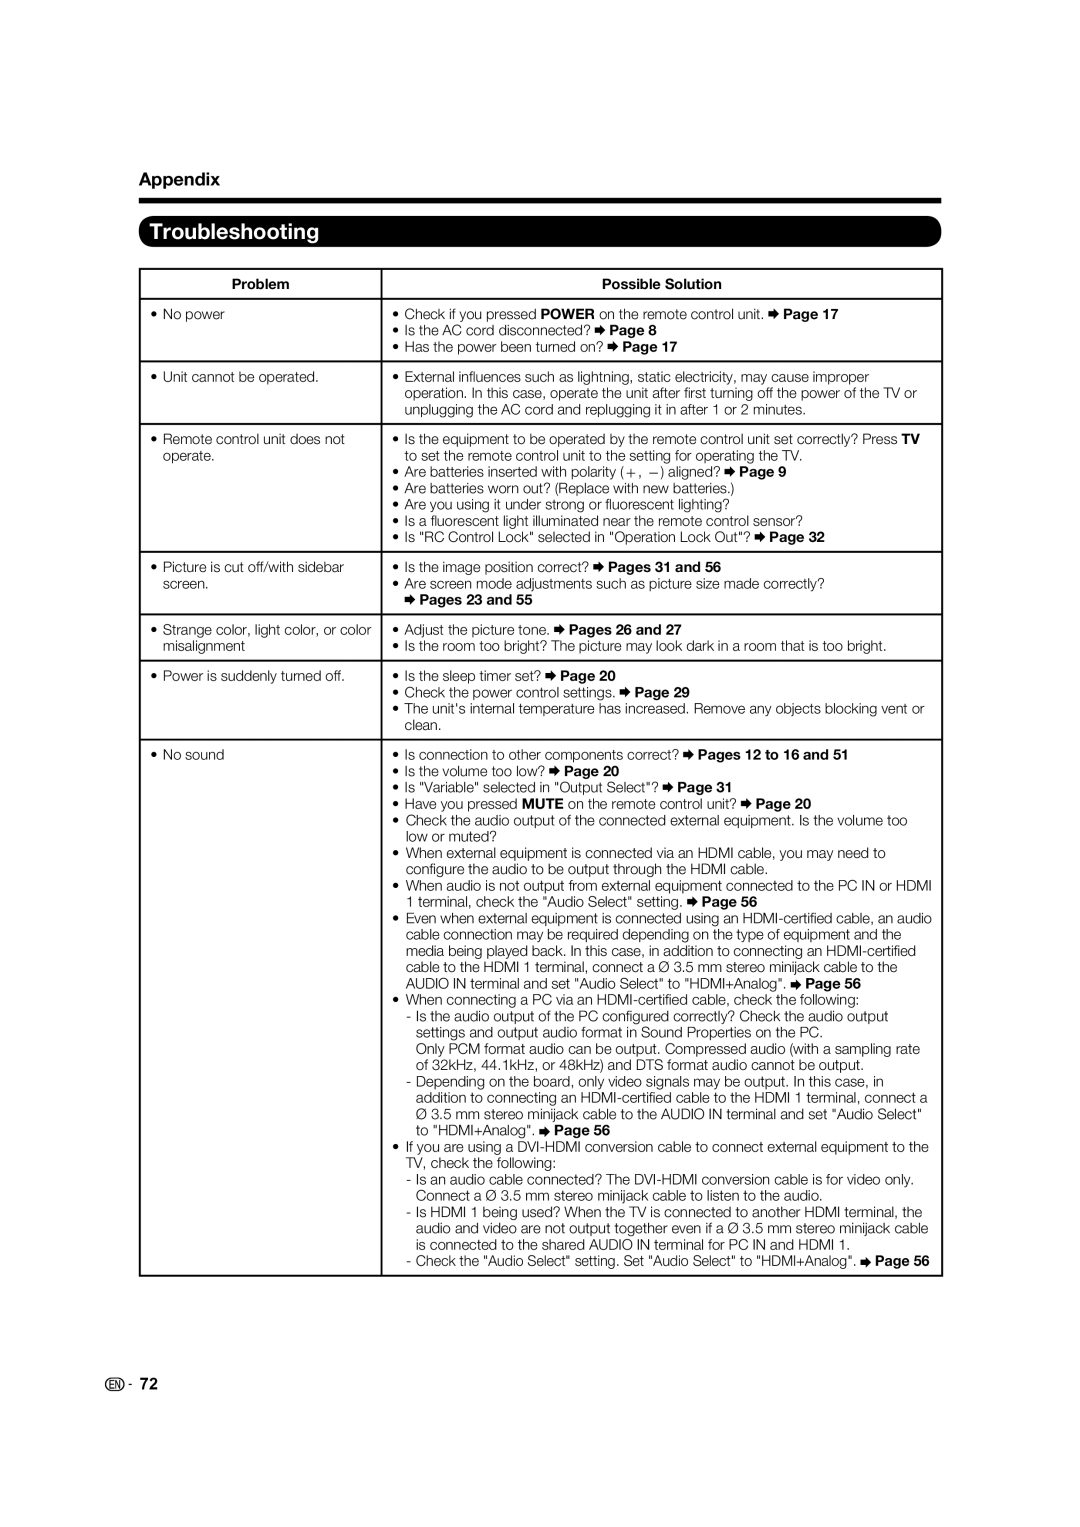 Sharp LC-70LE732U, LC-60LE632U Troubleshooting, Appendix, Problem, Possible Solution, No power, Pages 23 and, Pages 26 and 